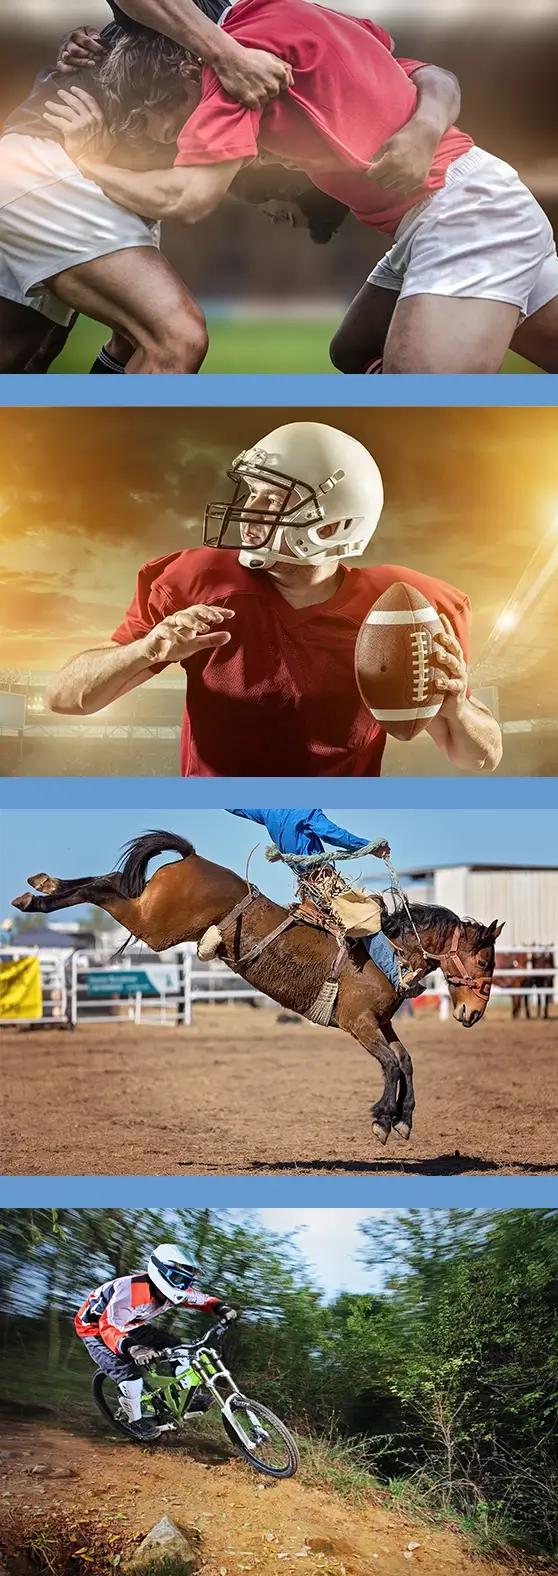 A collage featuring different sports such as rugby, American football, rodeo, and dirt bike racing serves to underscore the necessity of mental health treatment for athletes